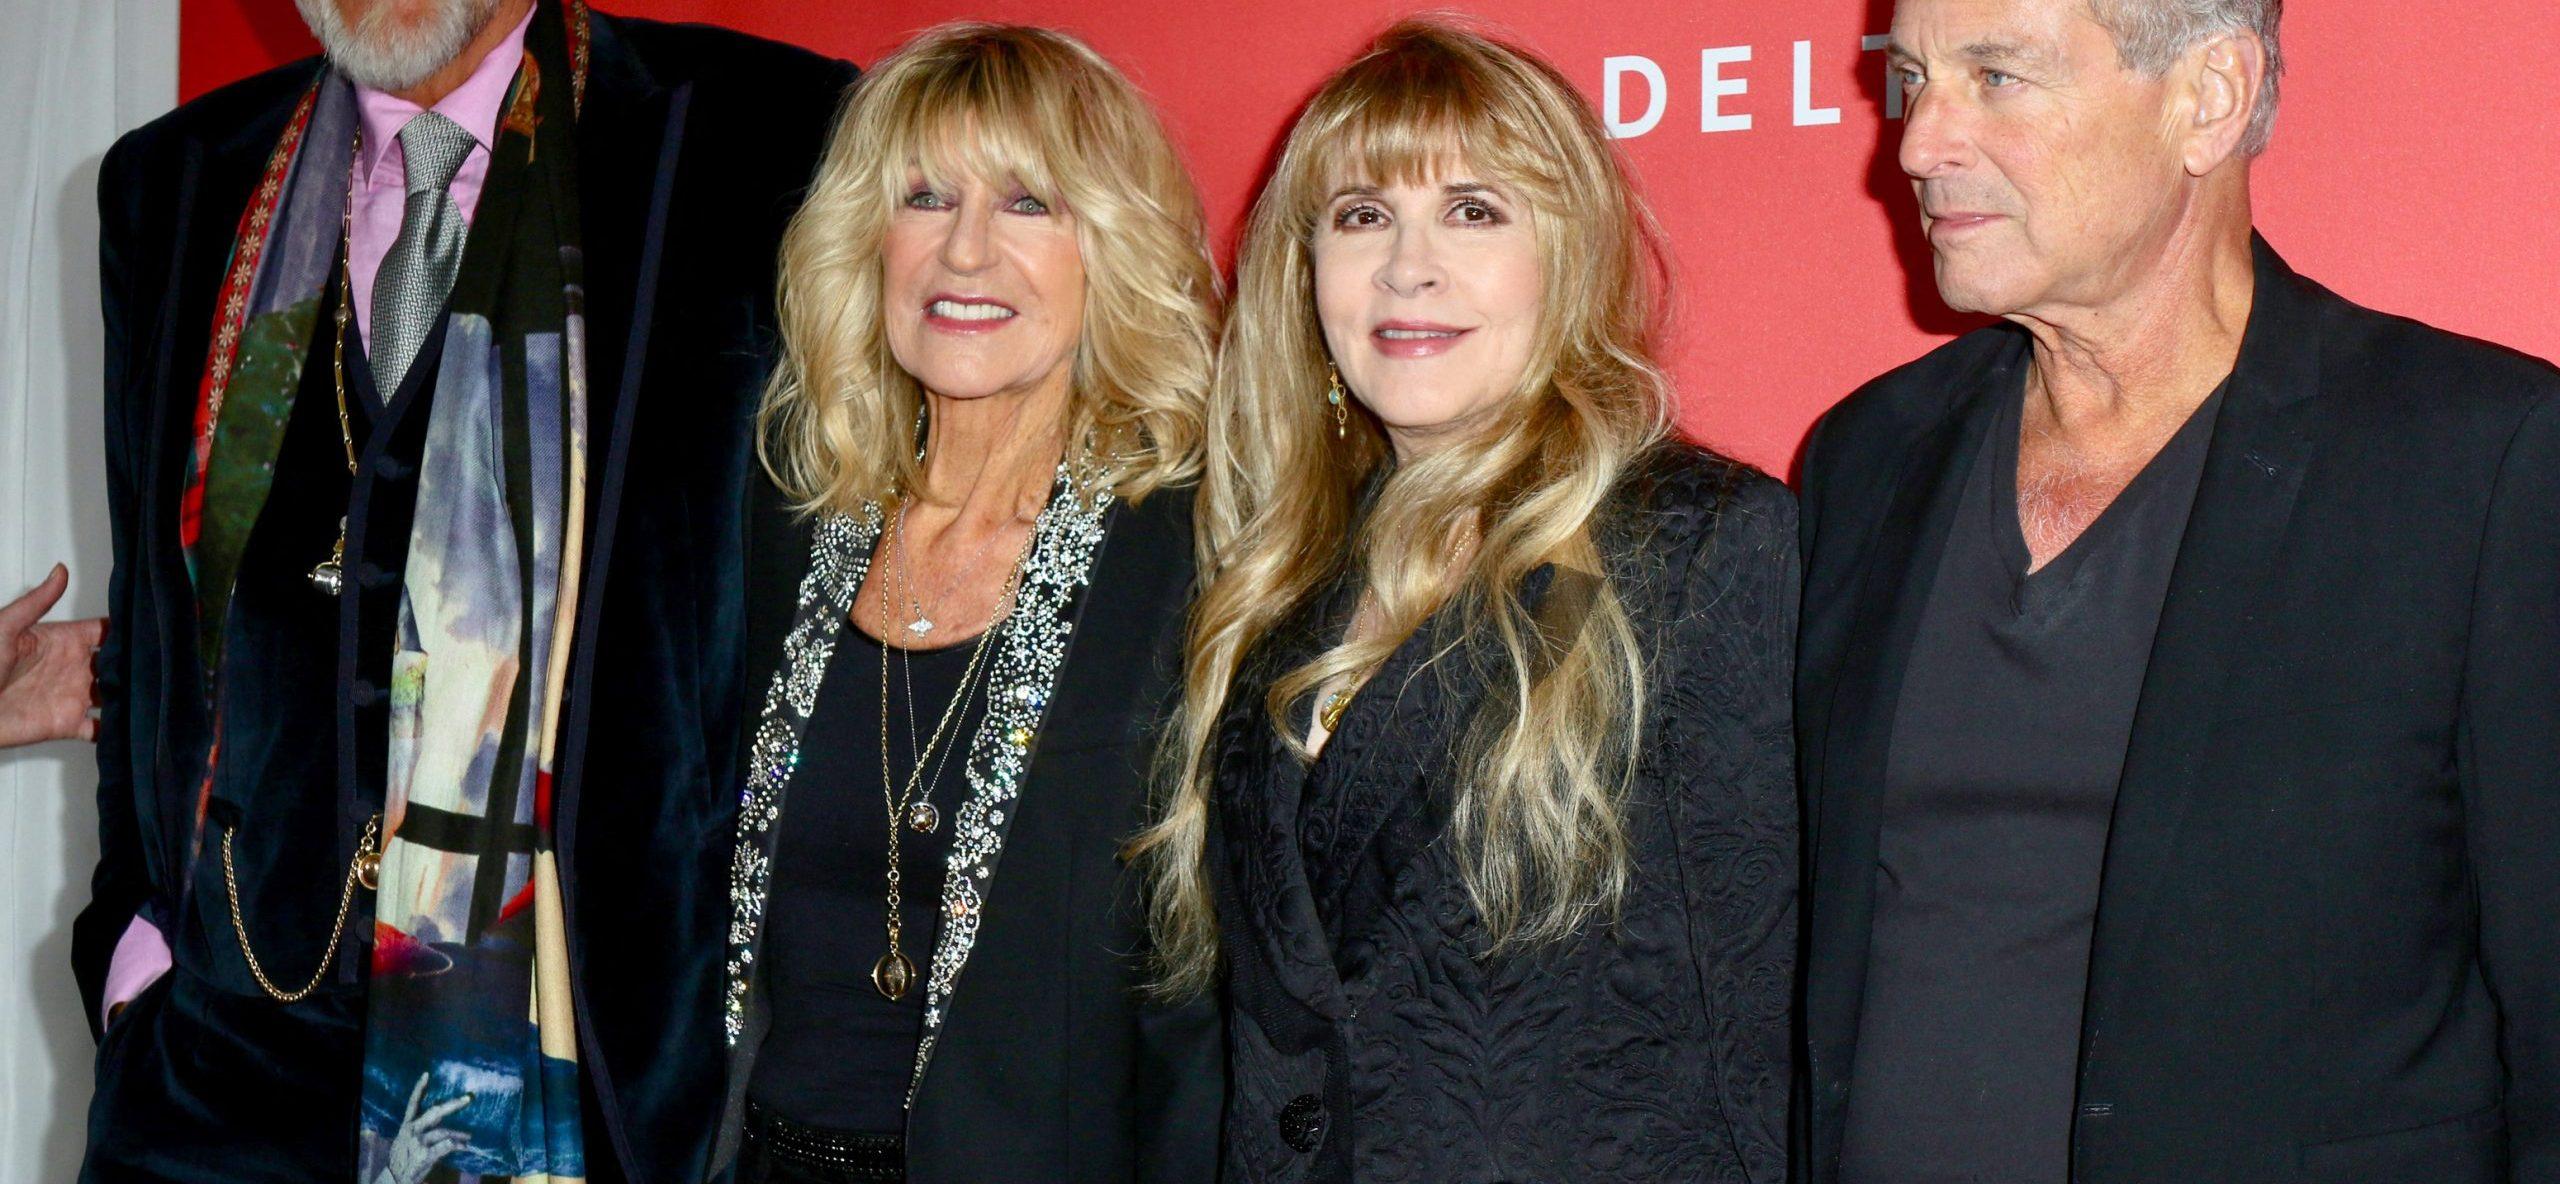 'Fleetwood Mac' Singer Christine McVie Died Of Massive Stroke, Following Cancer Diagnosis